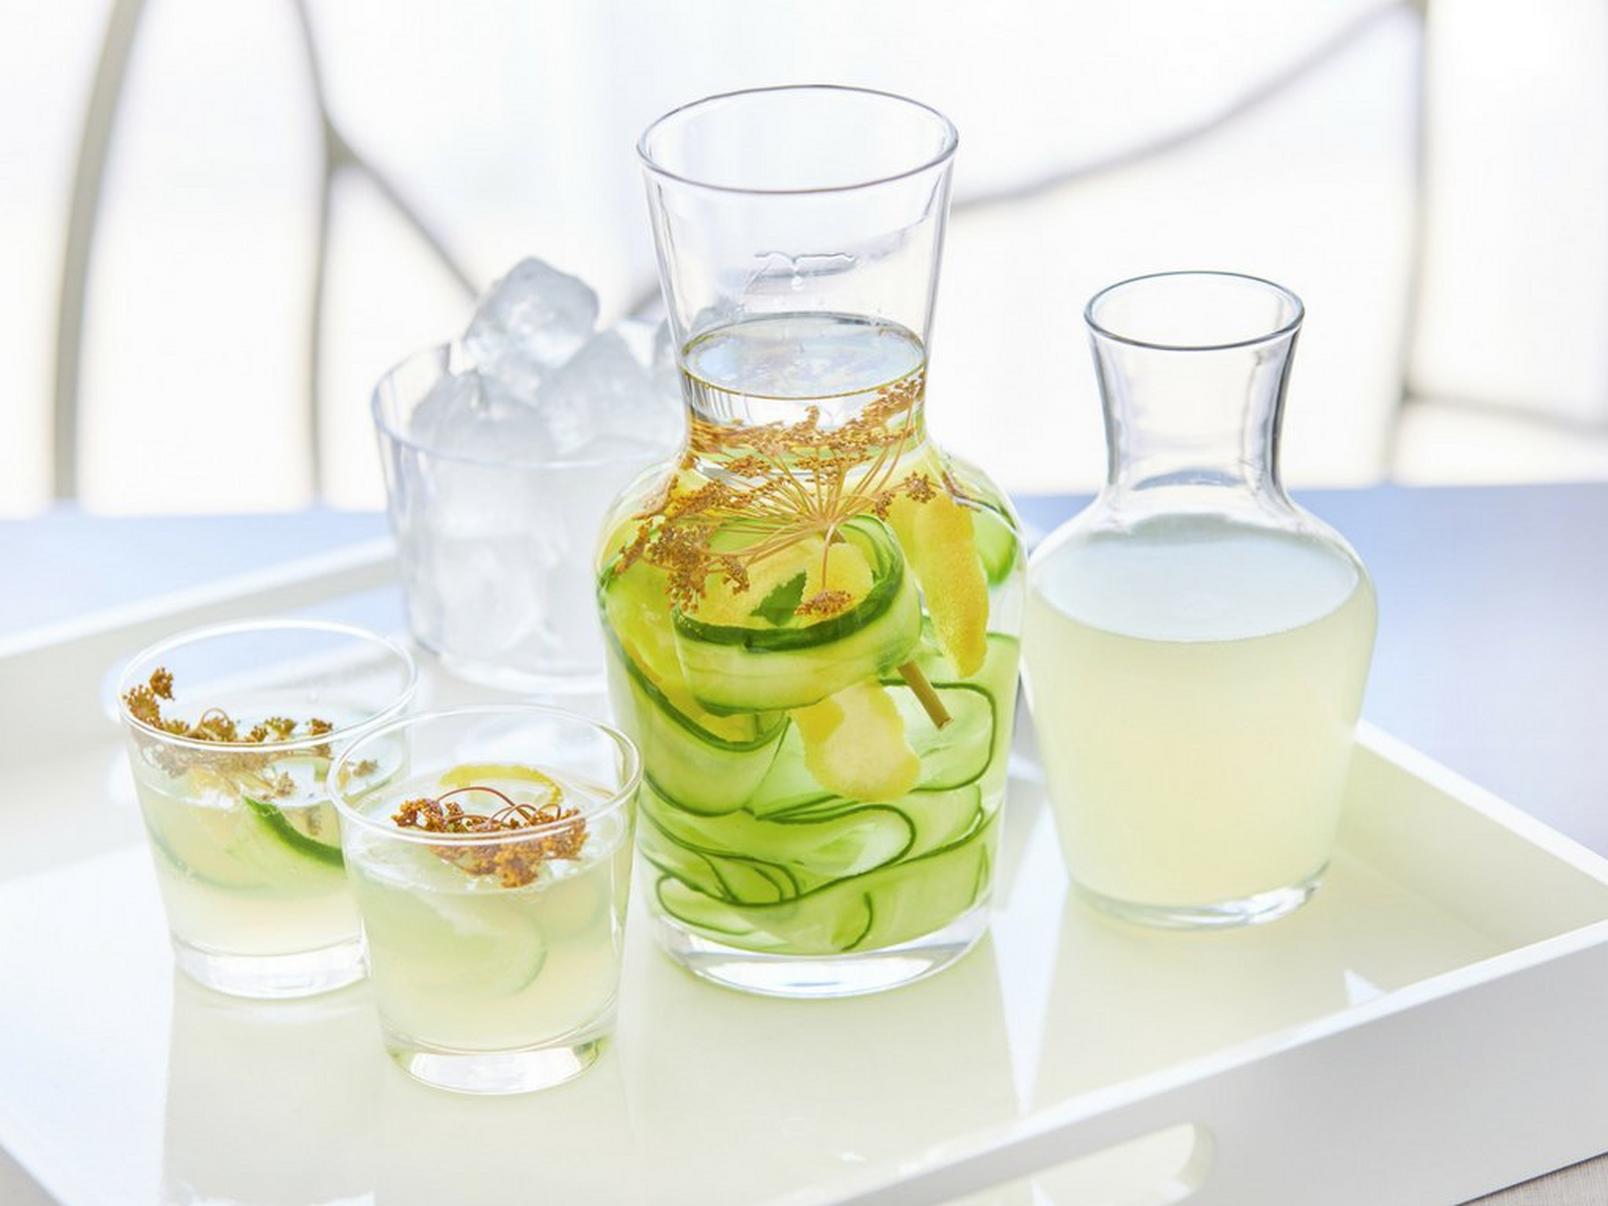 Cucumber-lemon-and-fennel-flower-gin-cocktail